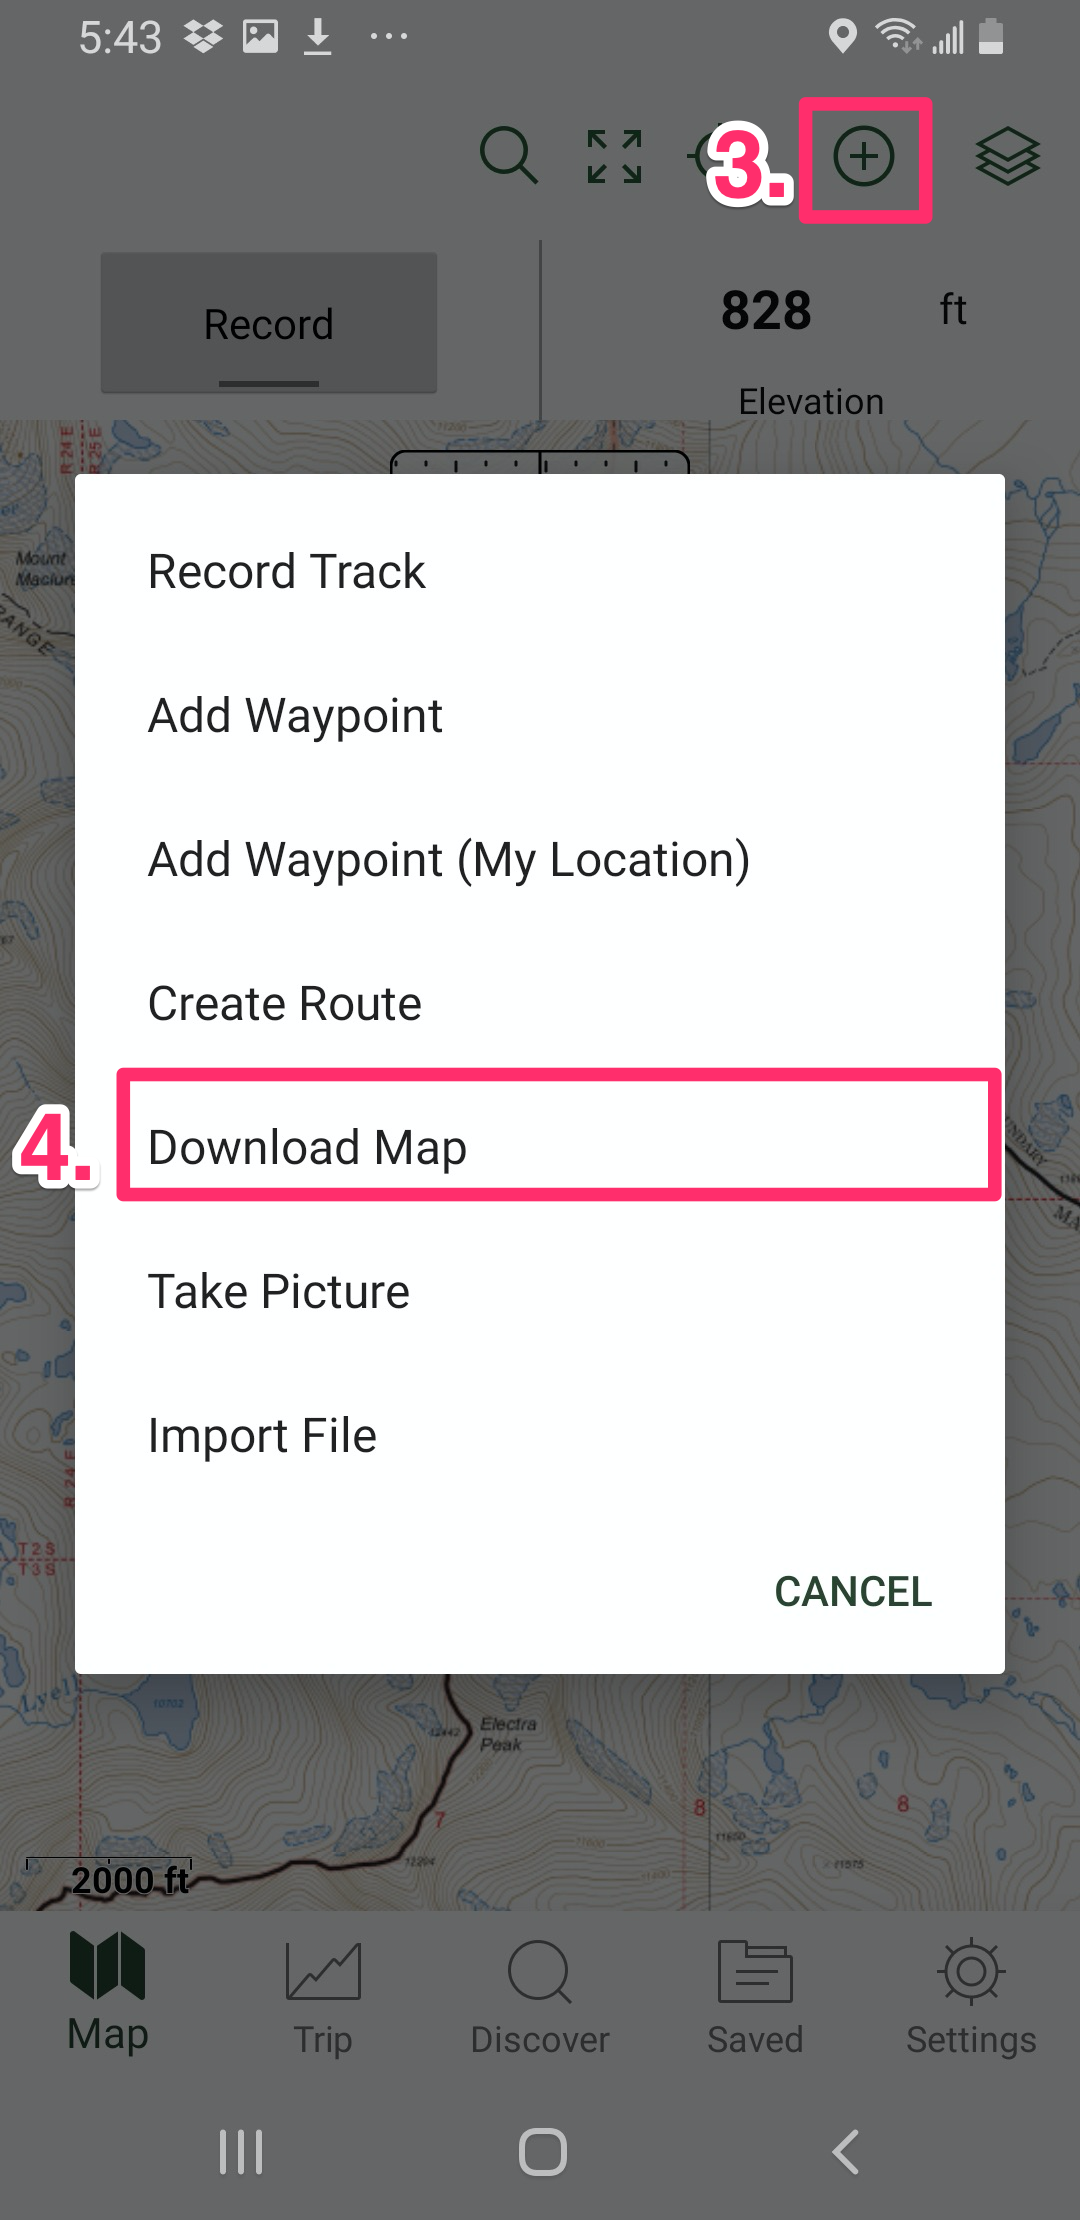 Download_Map_on_Android_Step_1.png